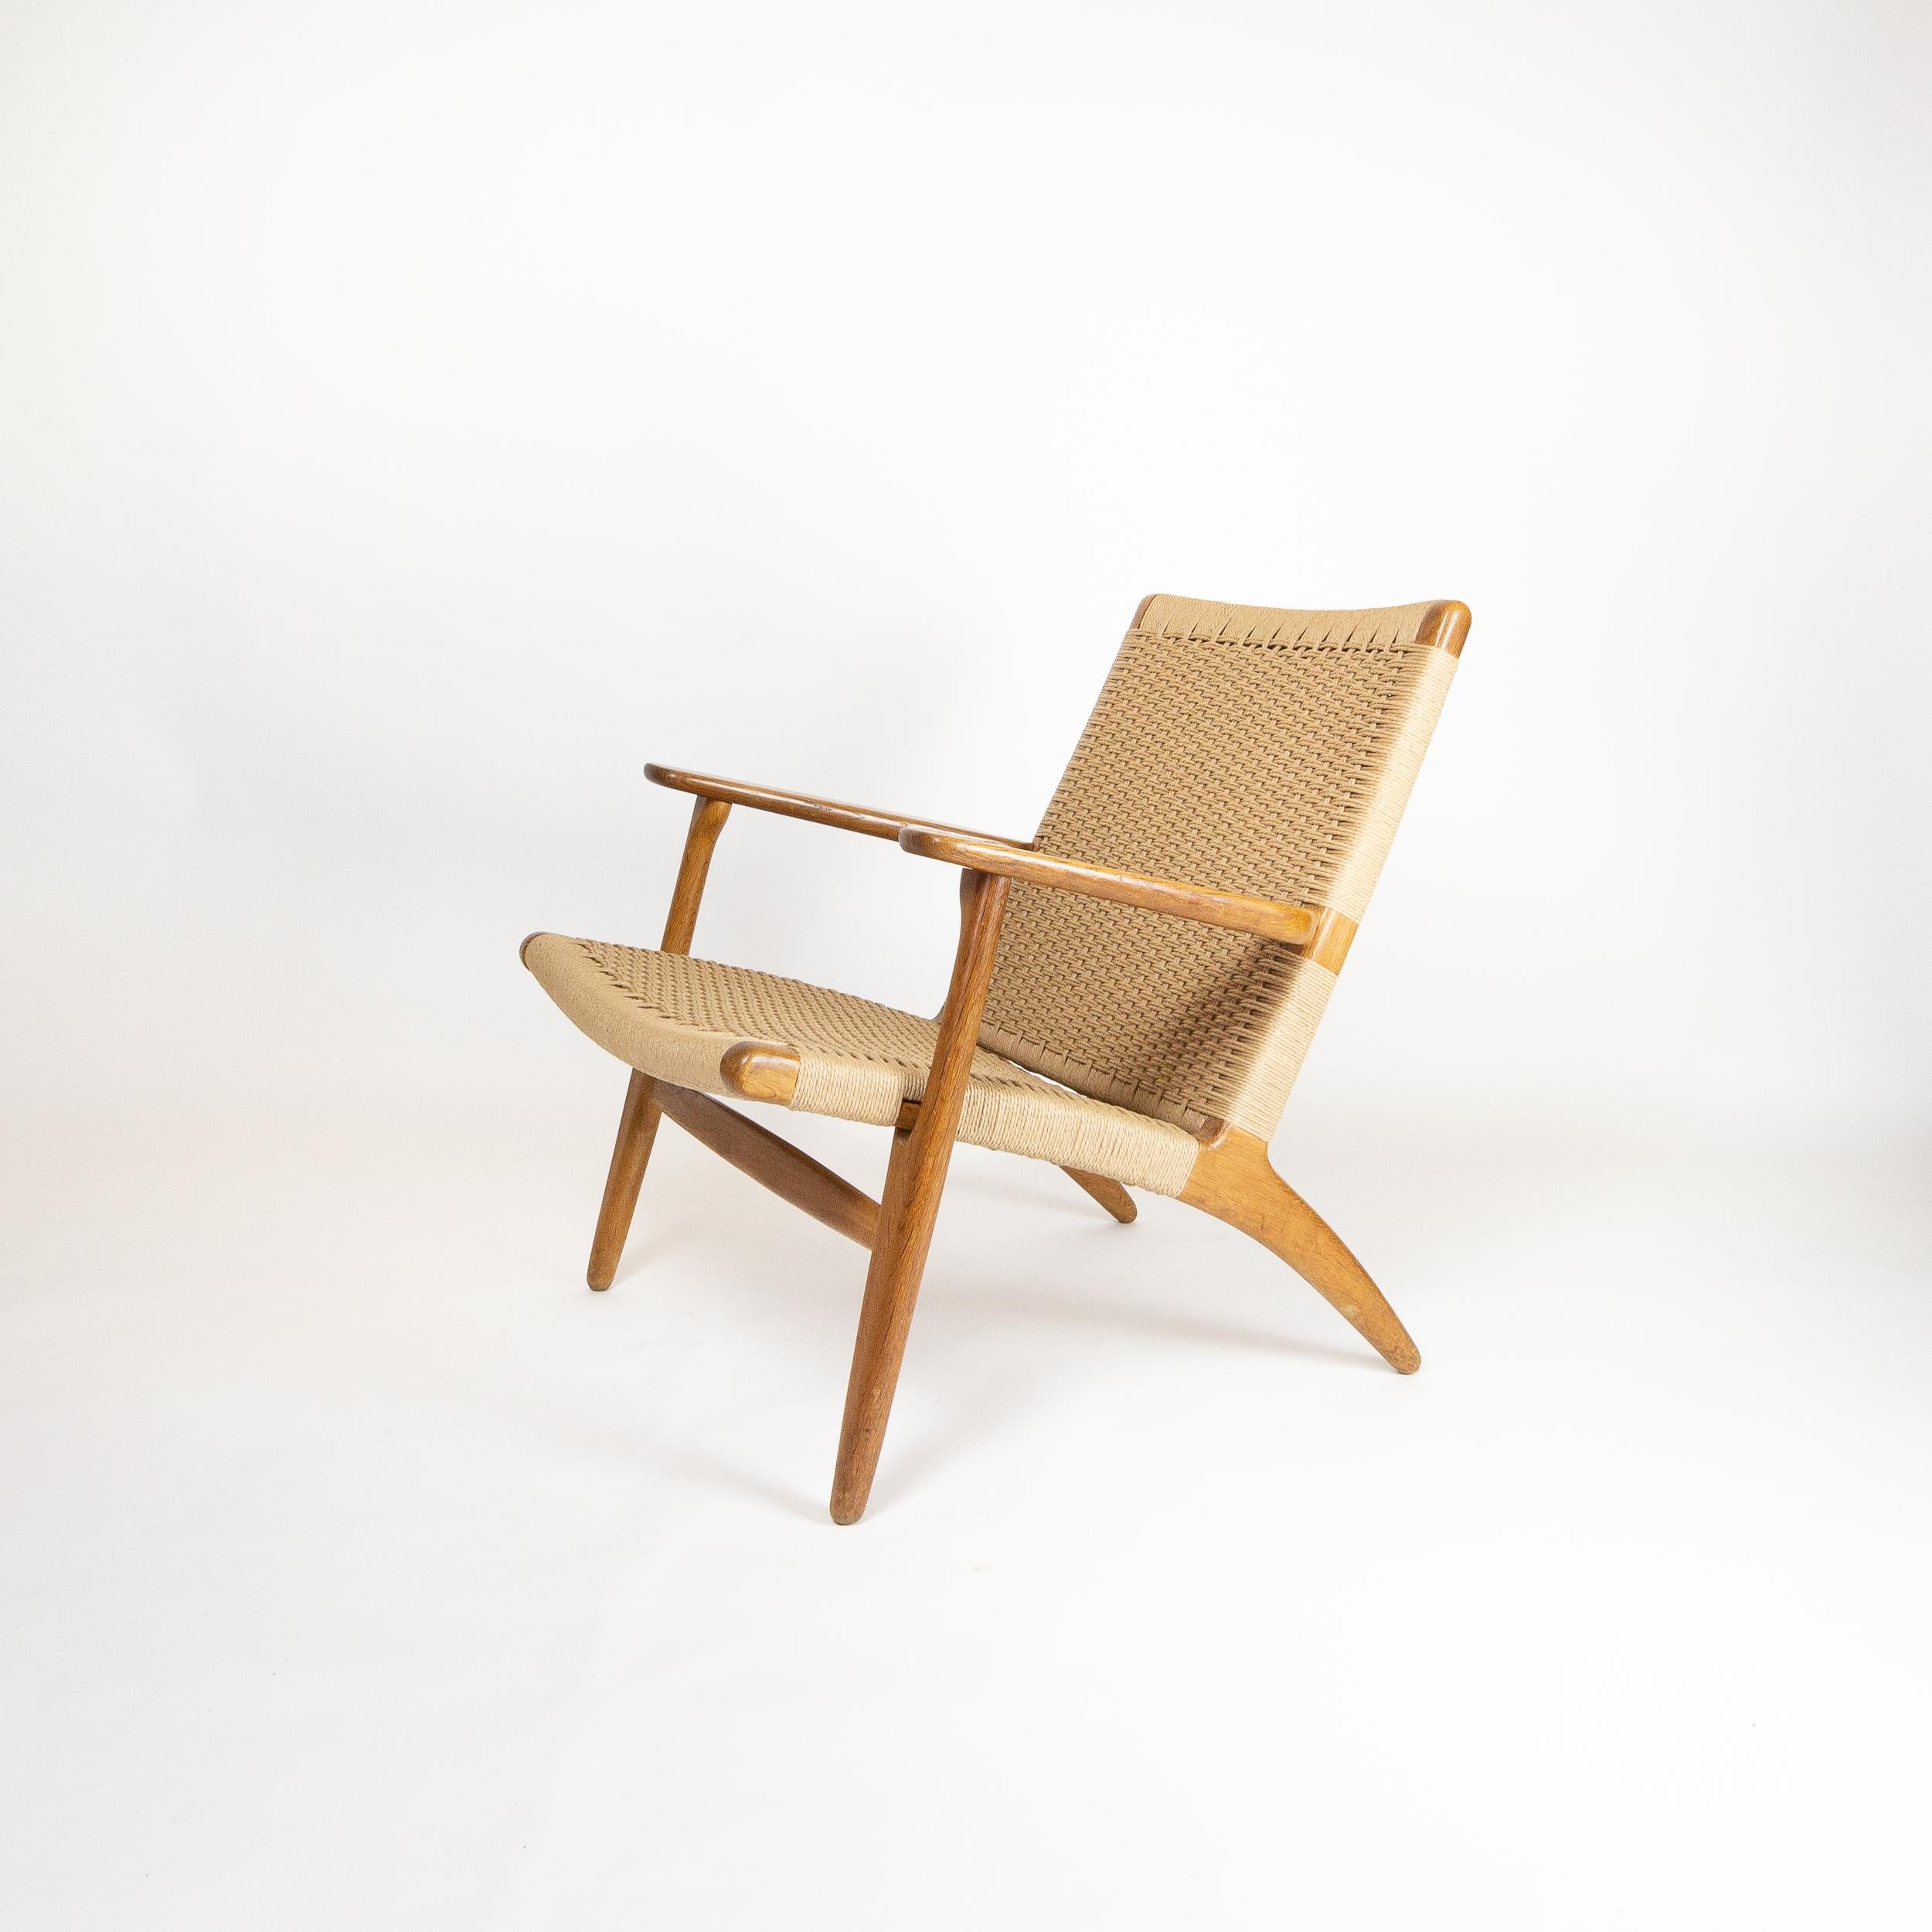 The CH25 is one of four chairs Wegner designed for Carl Hansen & Søn in his first 2 weeks with the company in 1950. Classic, highly desirable piece for both Wegner fans and chair collectors alike. Comfortable, solid and brilliantly designed this